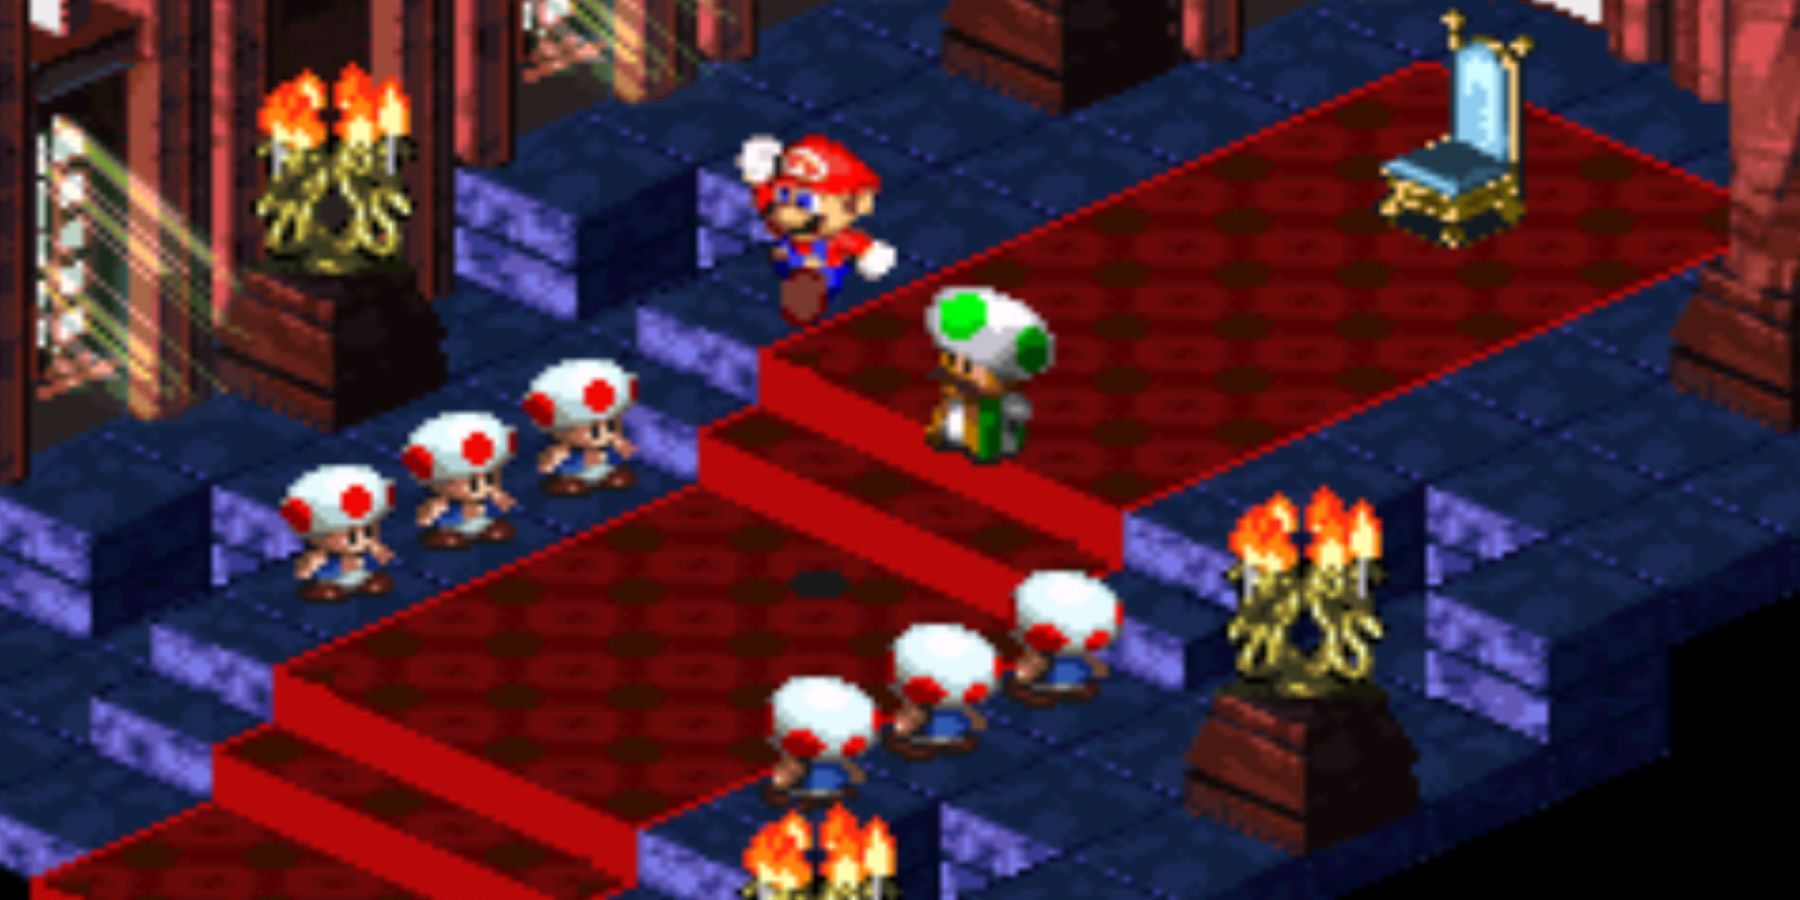 Mario and several Toads in the throne room of Peach's Castle in Super Mario RPG: Legend of the Seven Stars